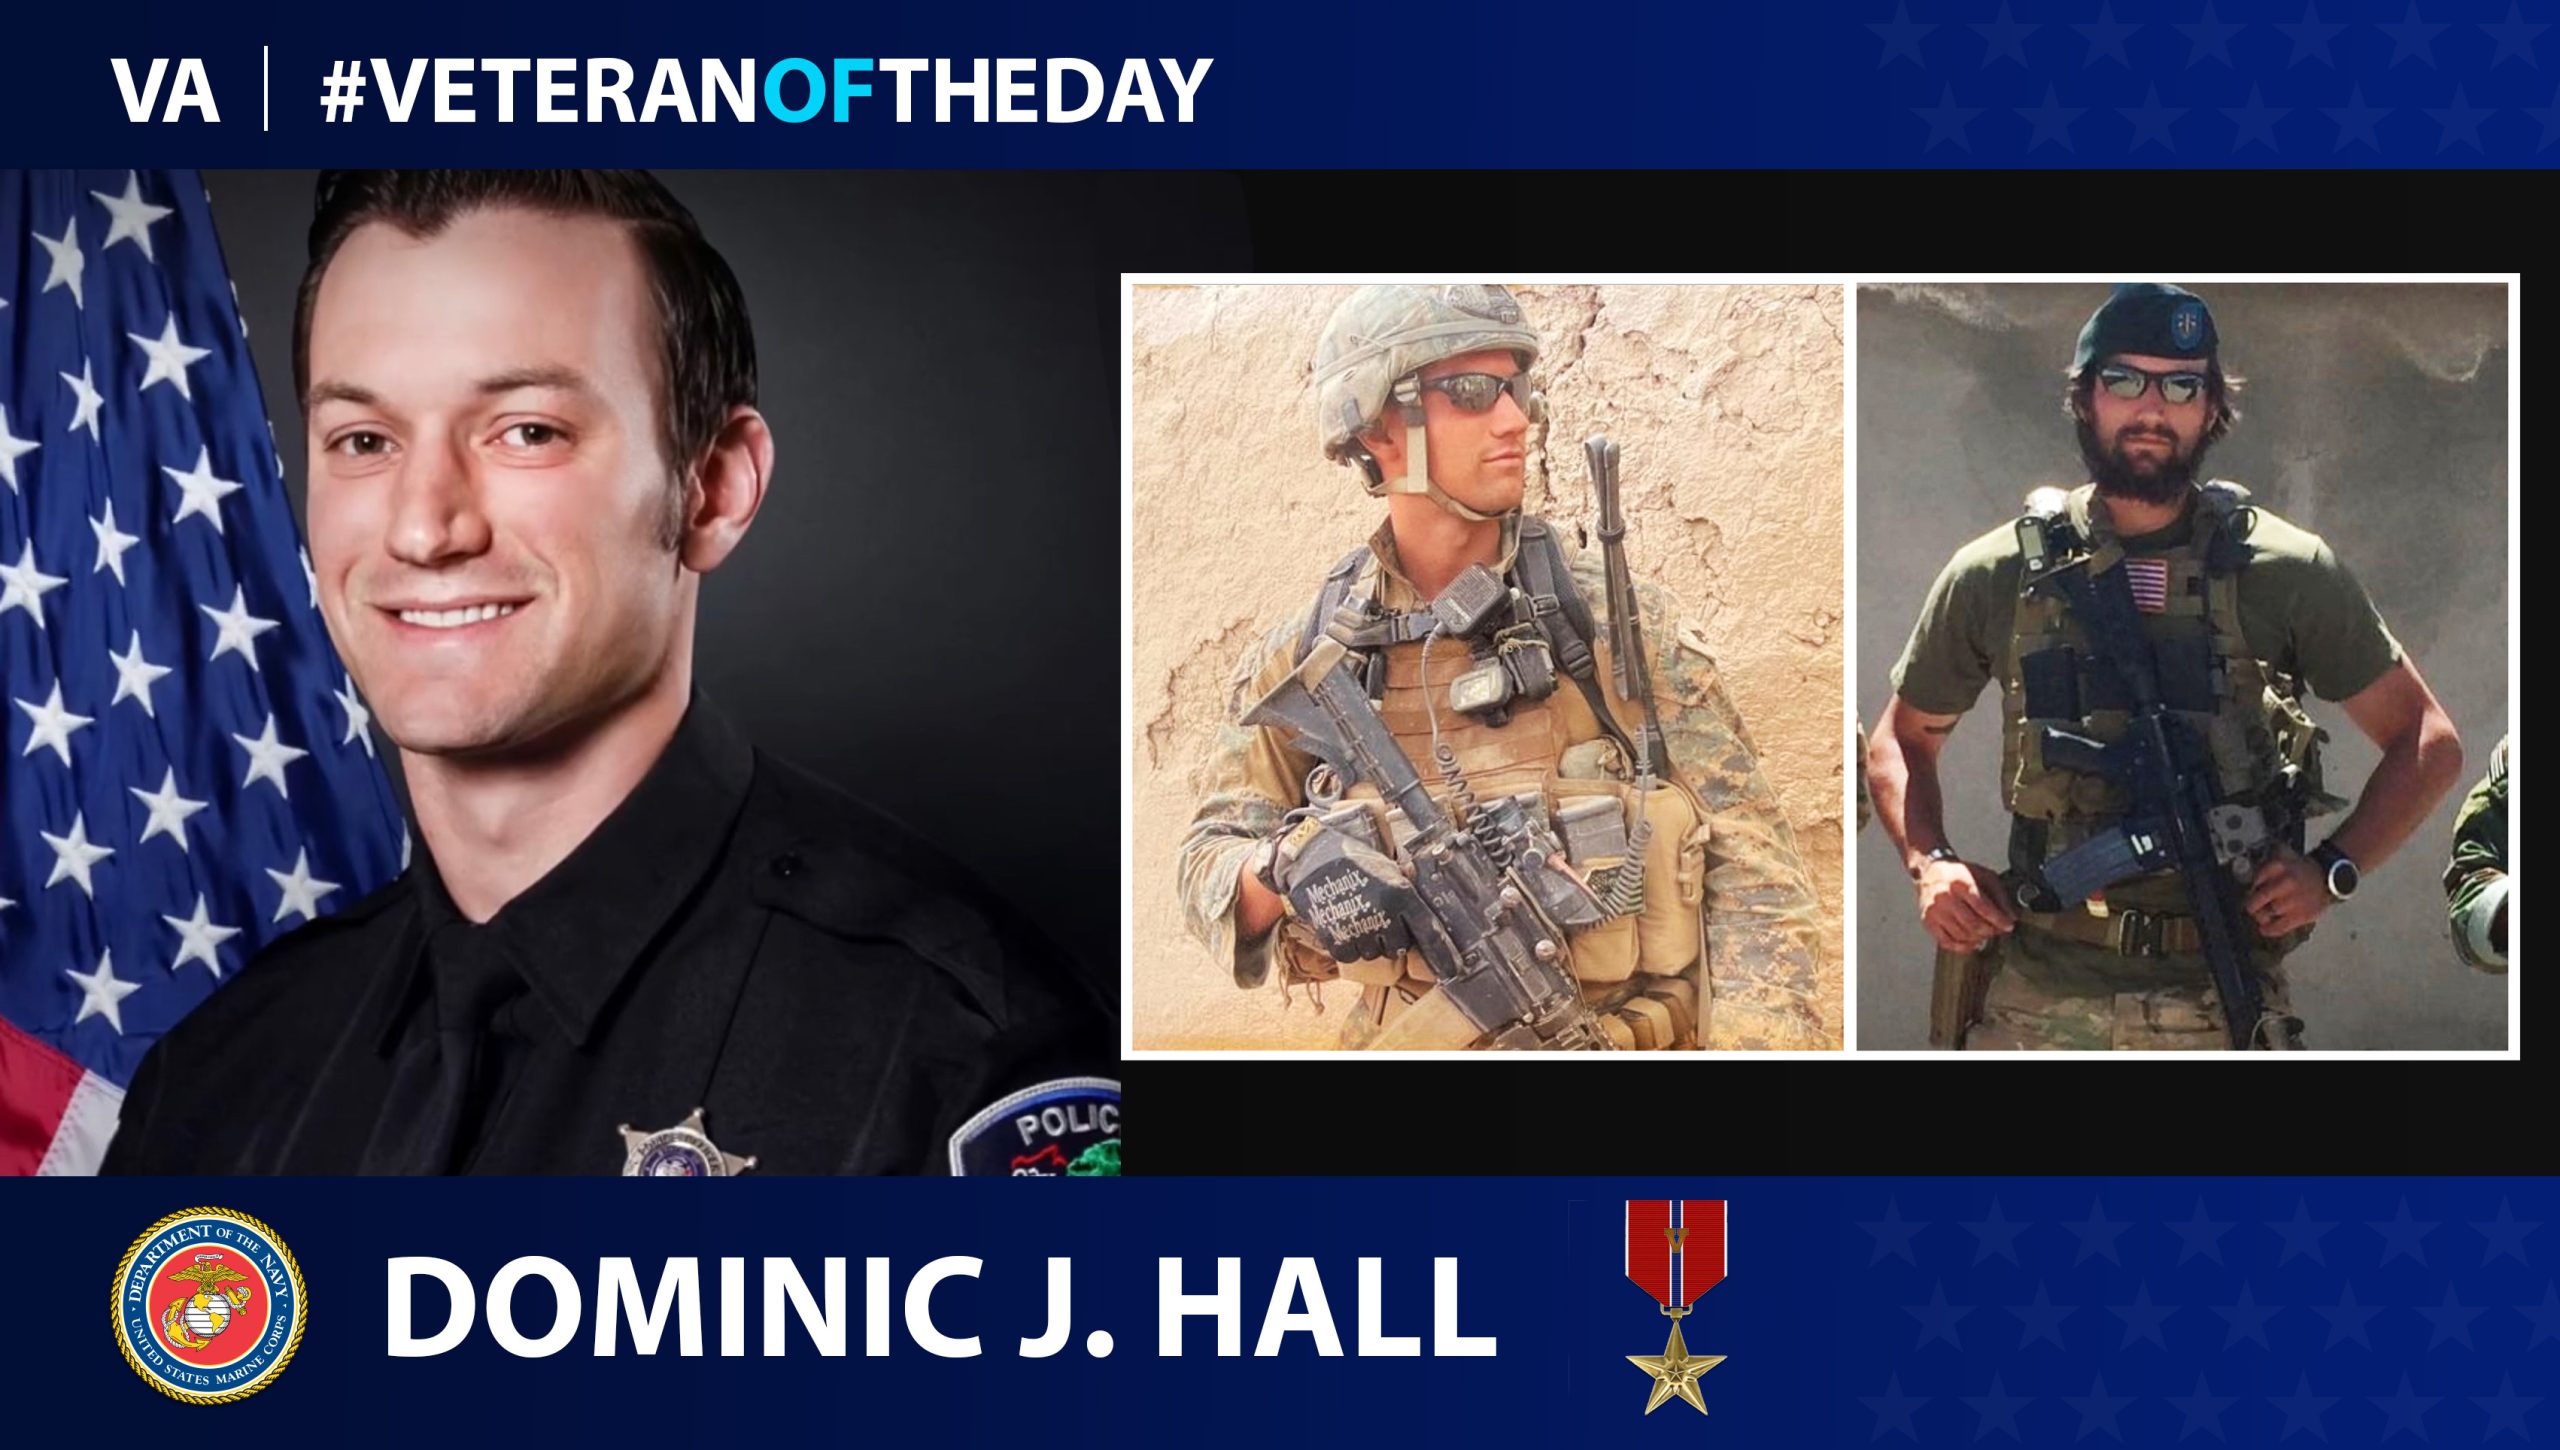 Marine Corps and Army Veteran Dominic J. Hall is today’s Veteran of the Day.